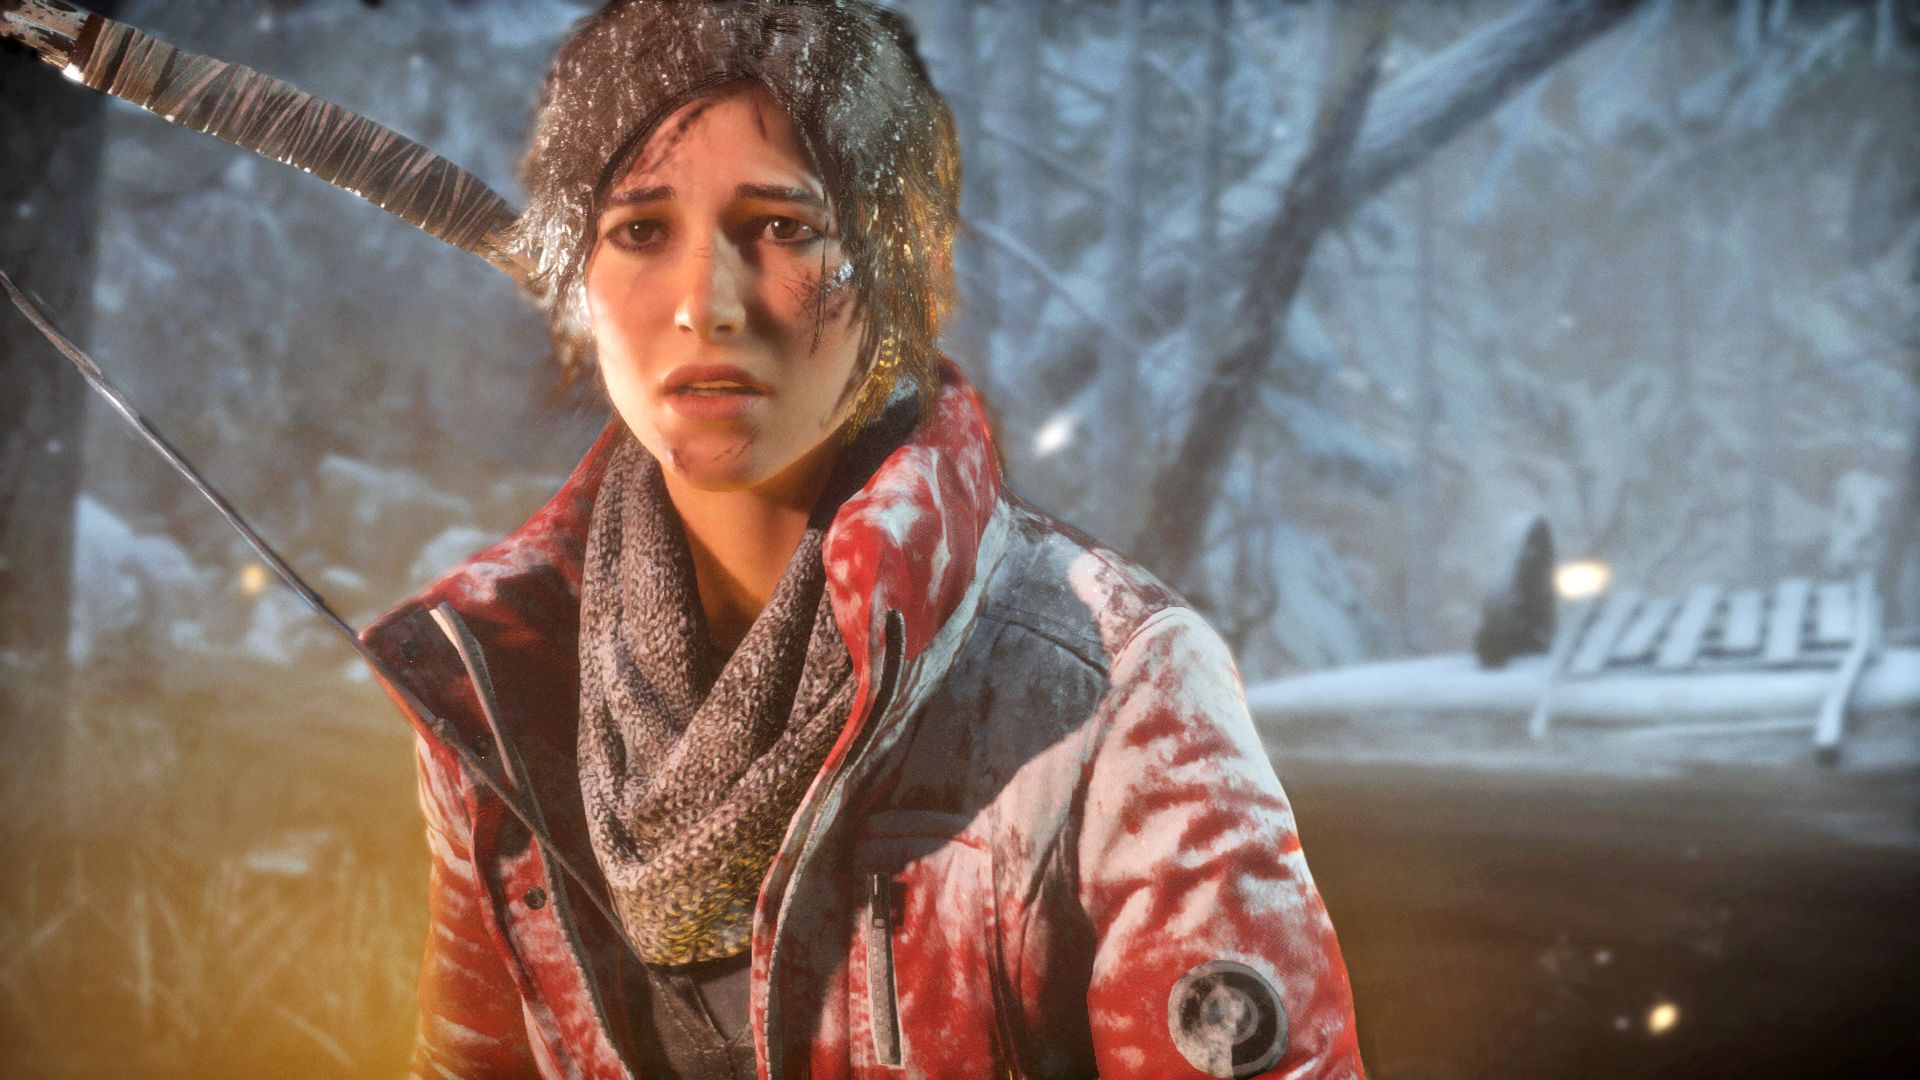 Rise of the Tomb Raider - PS4